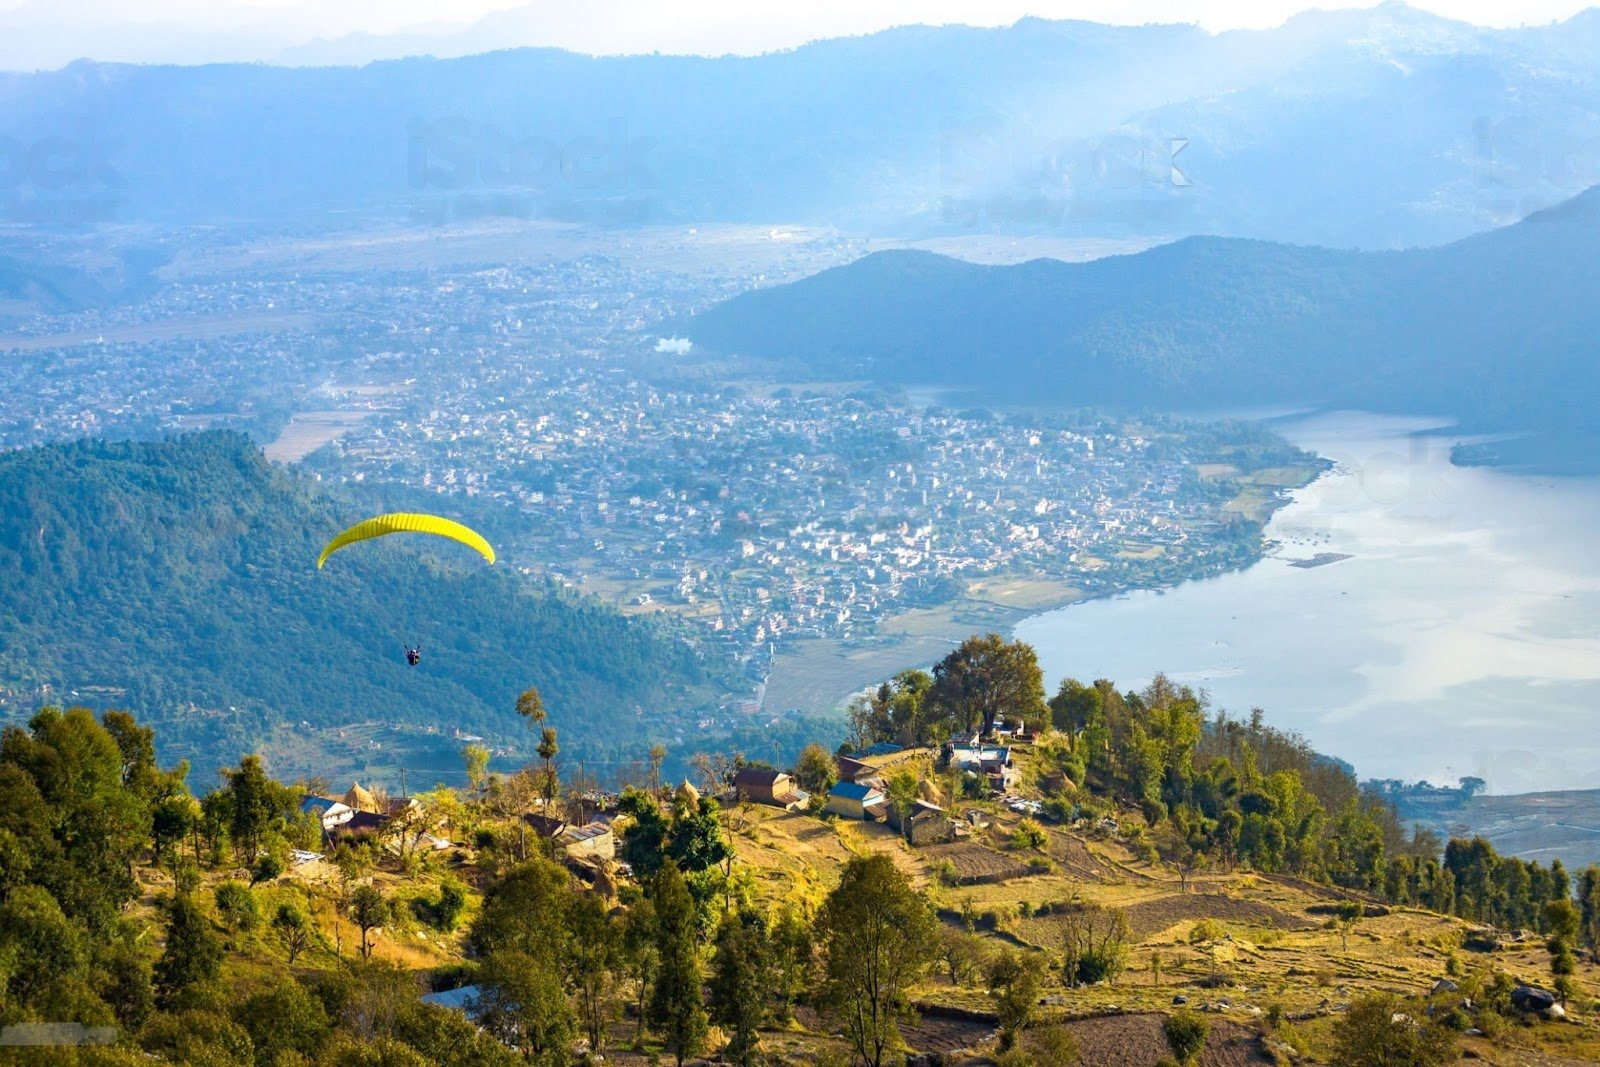 Elevate Trek- Paragliders soaring high above the beautiful landscape of Pokhara.